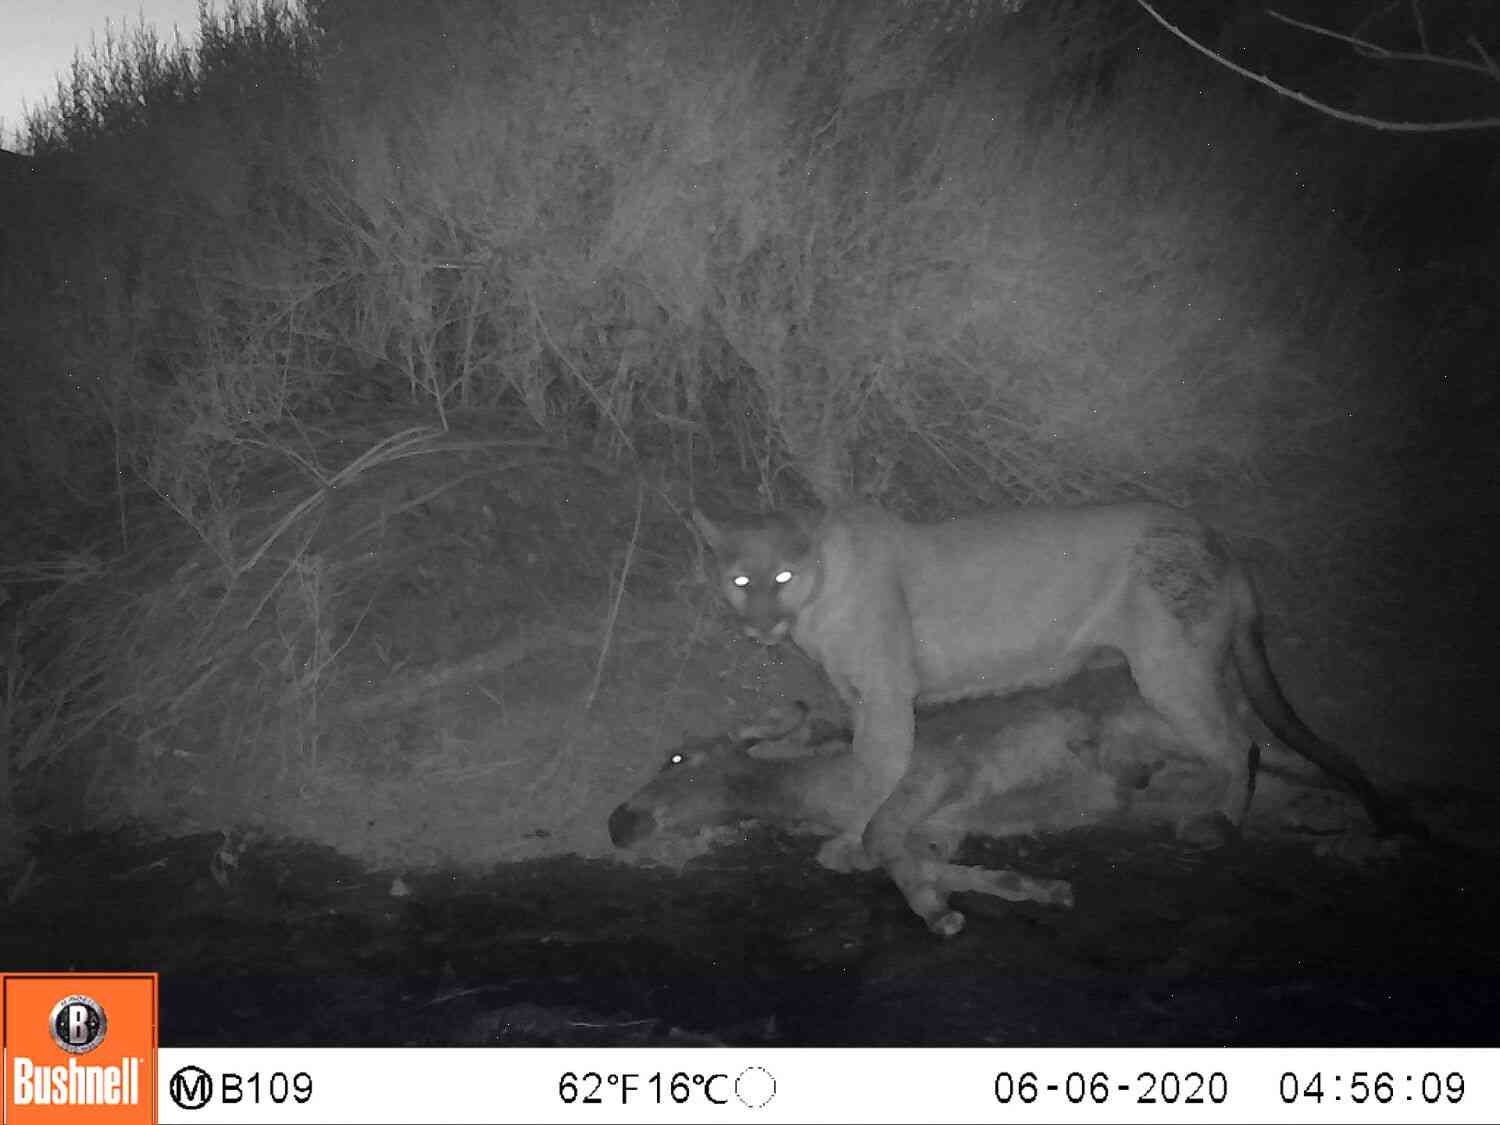 The Mountain Lions Are Killing Wild Donkeys